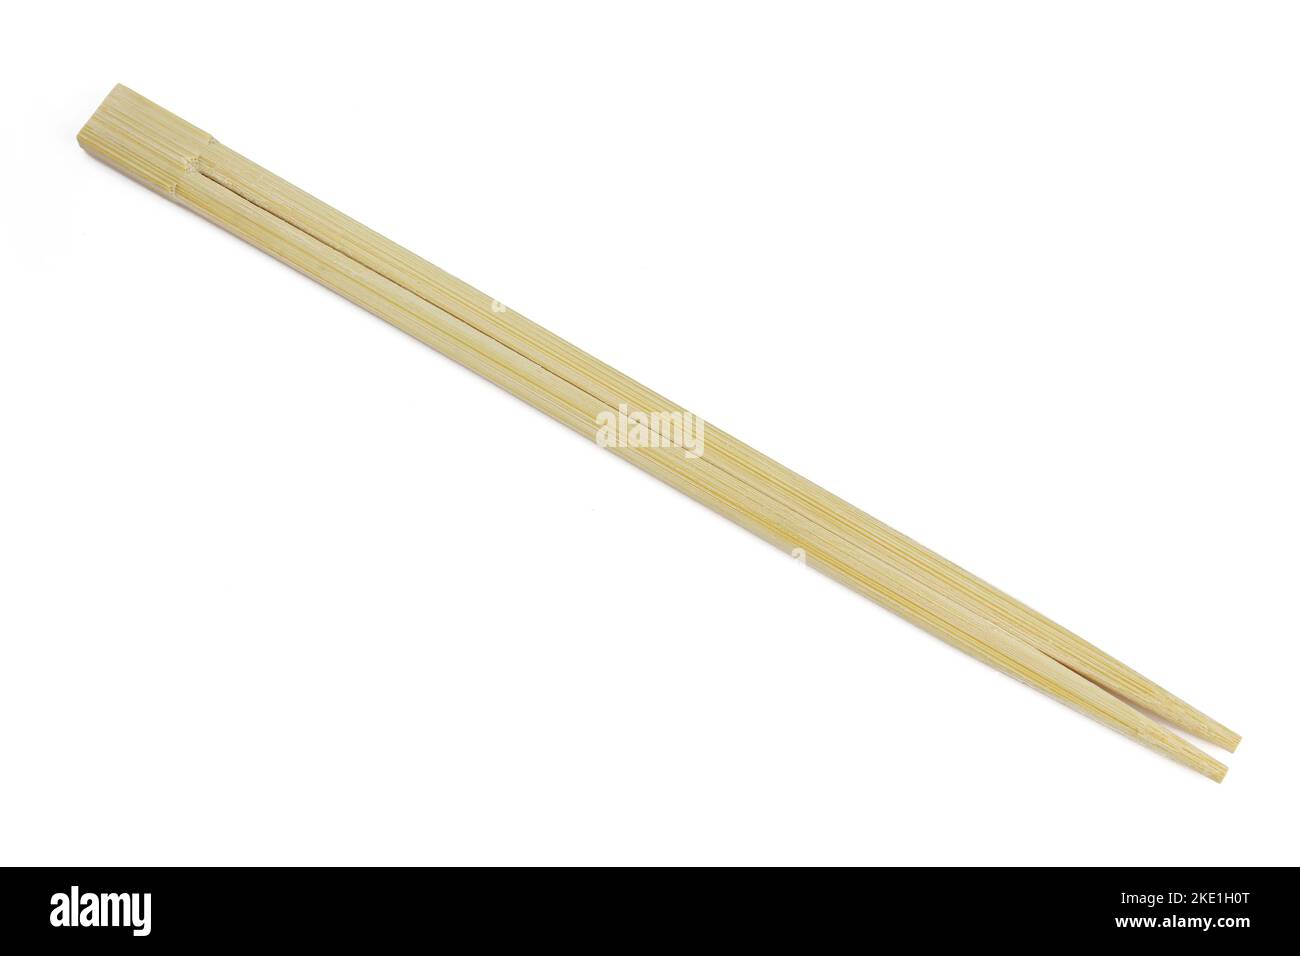 Wooden asian chopsticks isolated on white background. Bamboo food tool Stock Photo